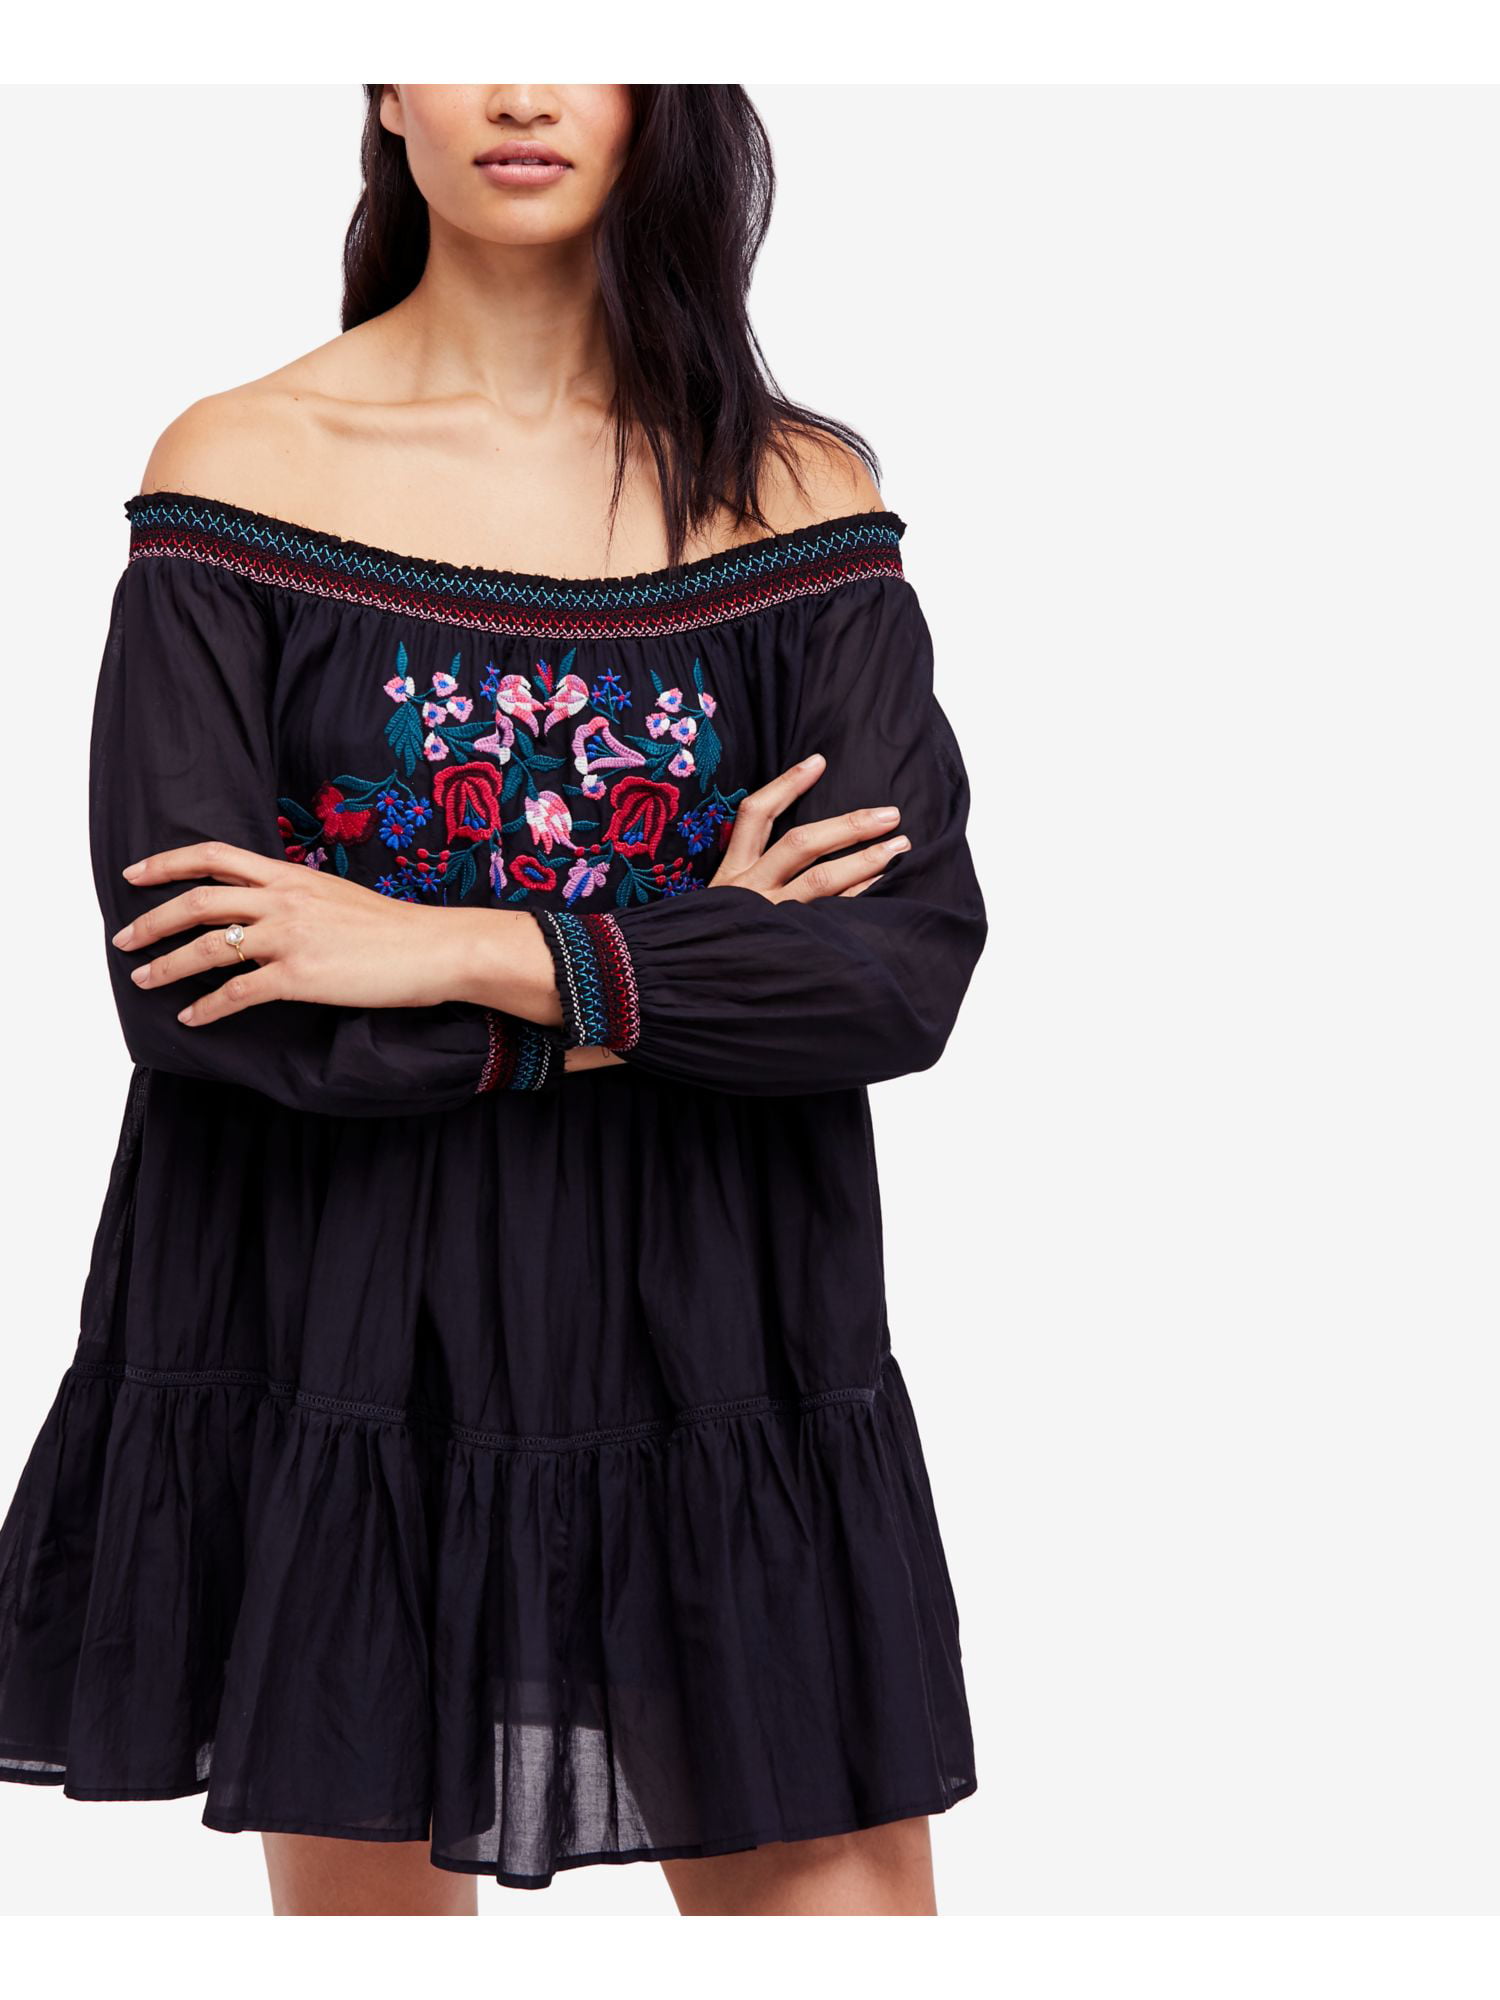 FREE PEOPLE Womens Black Embroidered ...